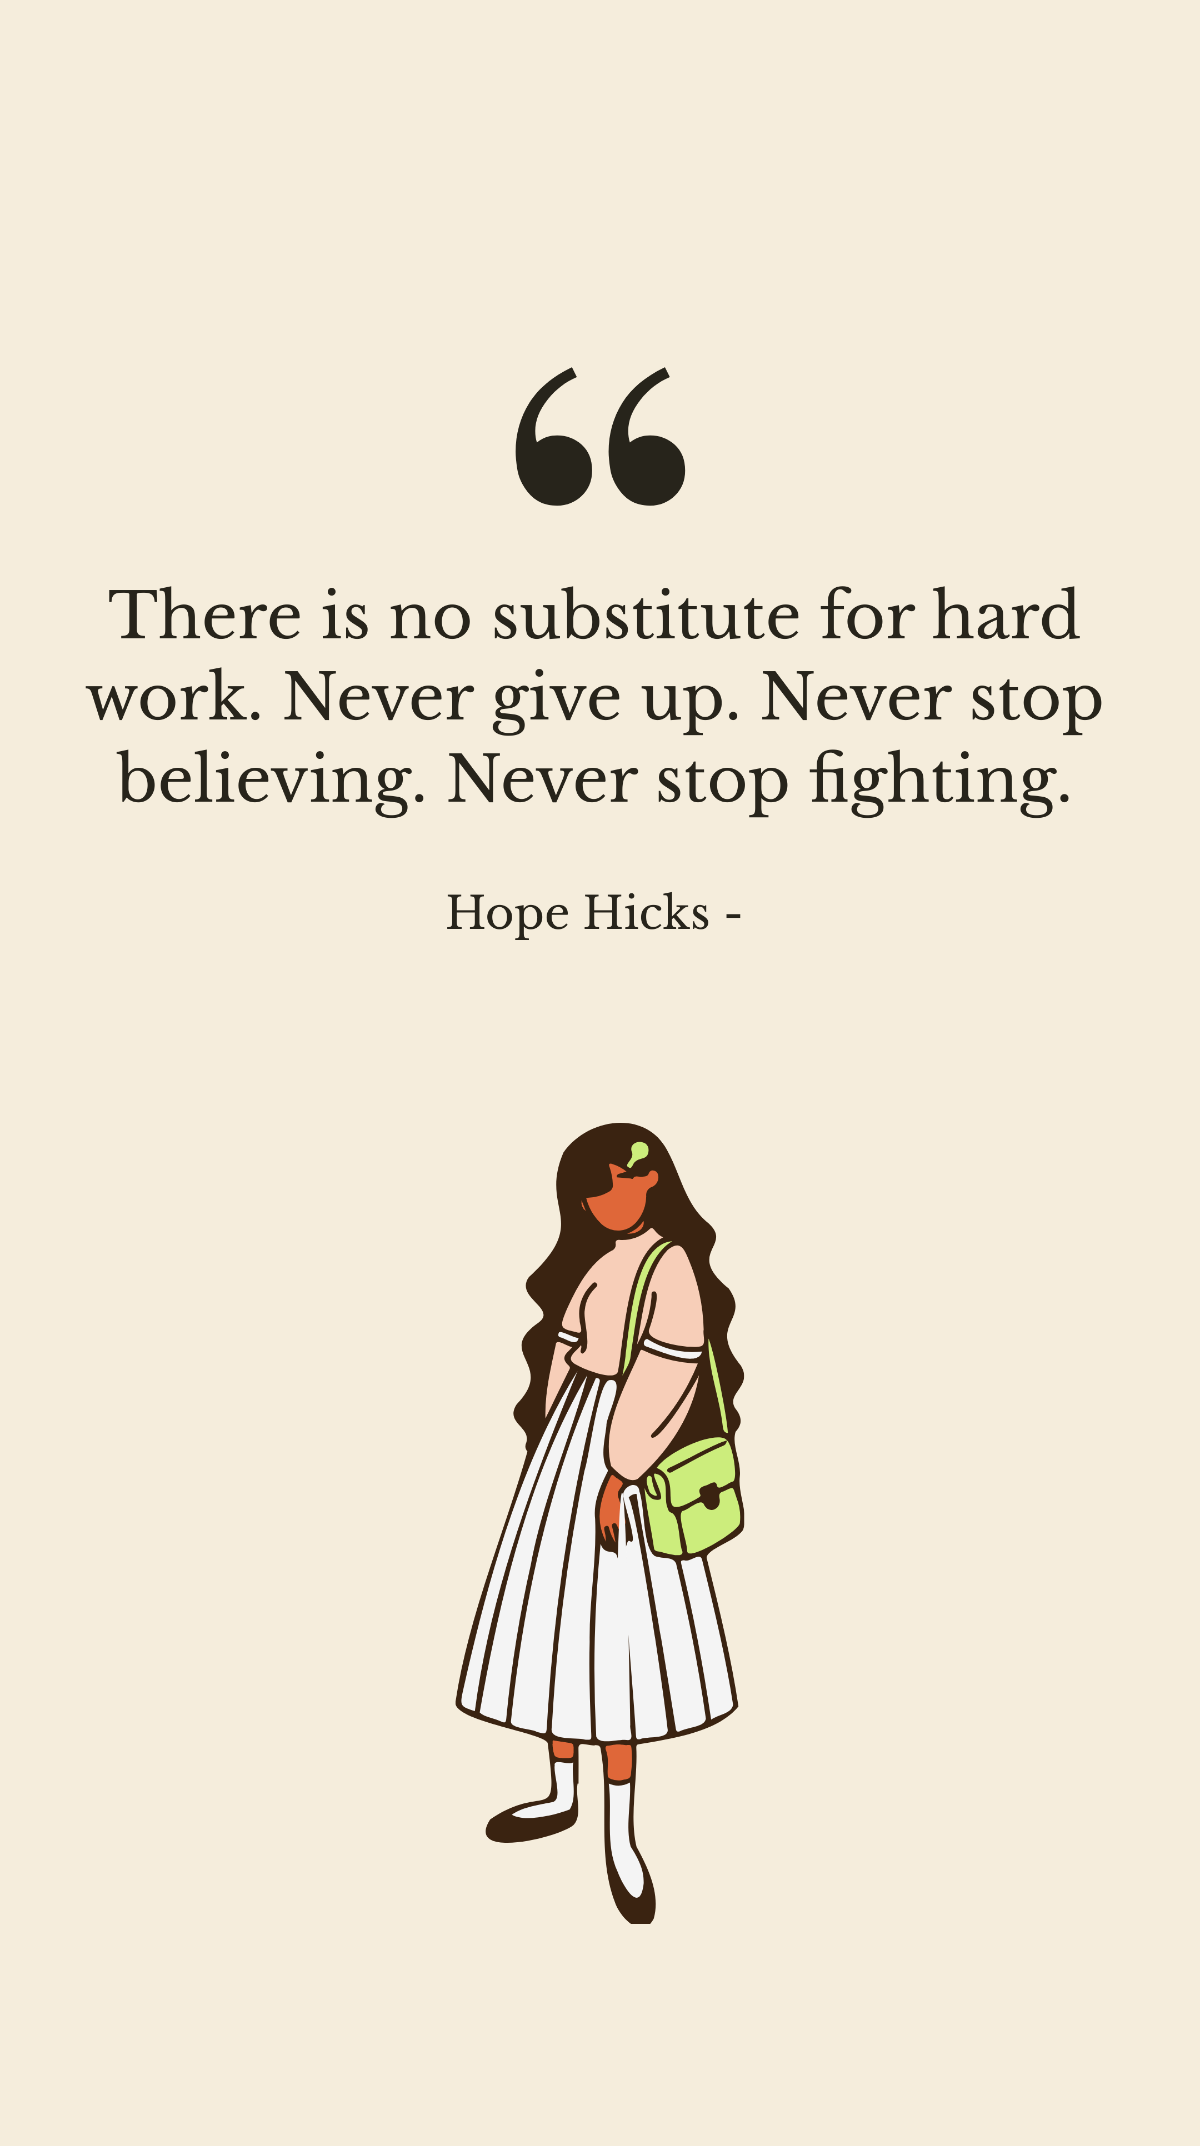 Hope Hicks - There is no substitute for hard work. Never give up. Never stop believing. Never stop fighting. Template